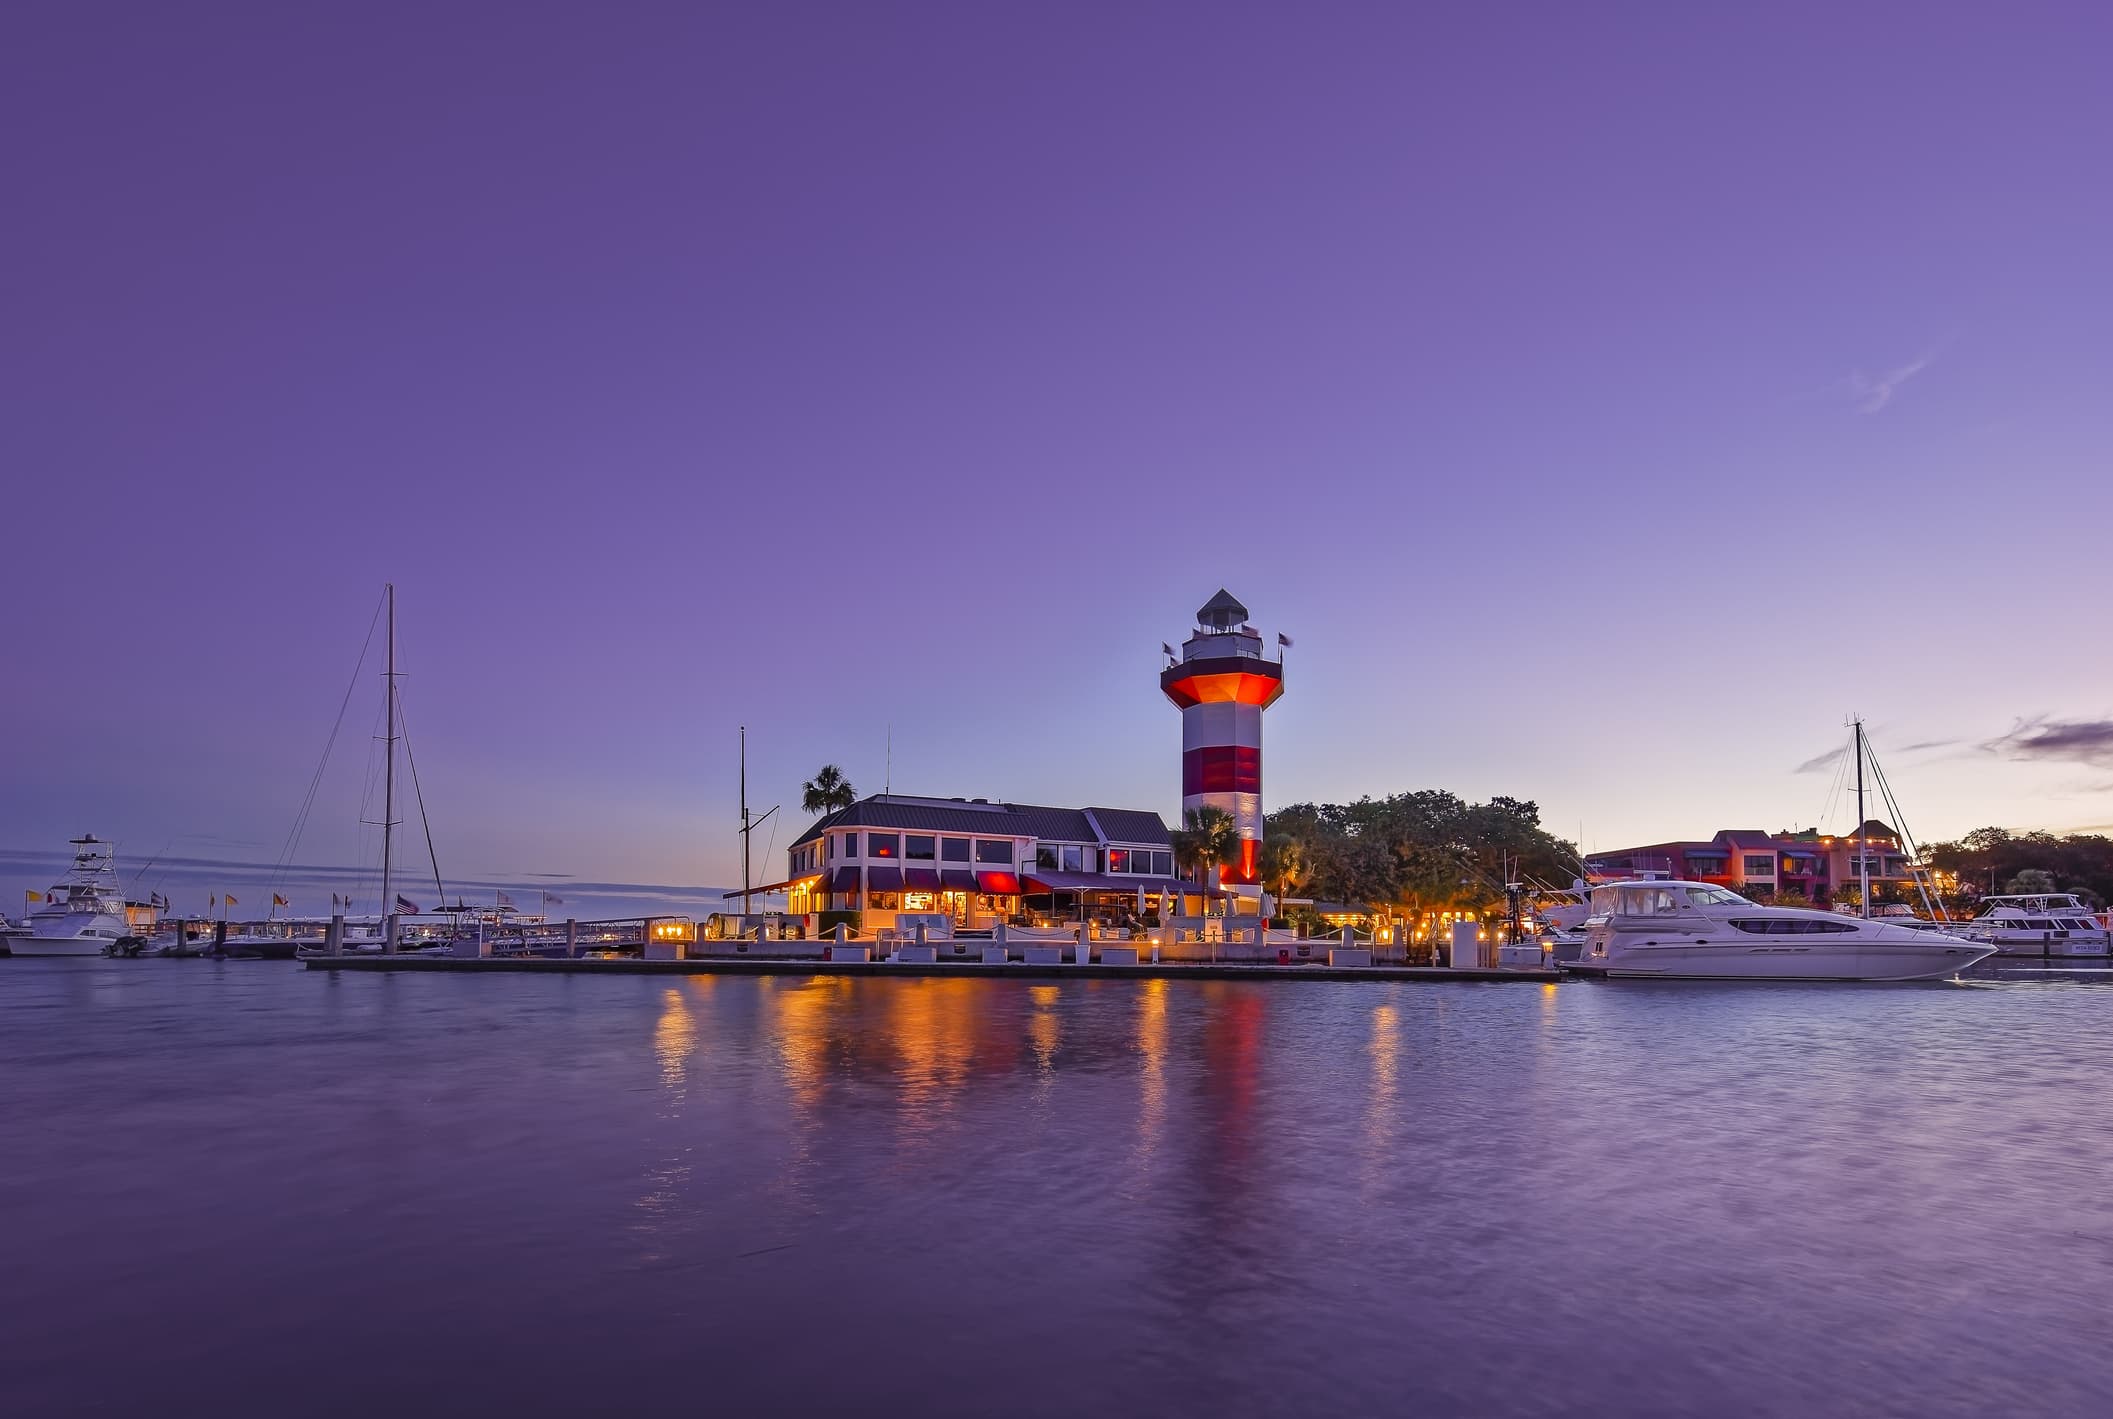 A view of the Sea Pines Resort, on Hilton Head Island, SC, with its iconic lighthouse.